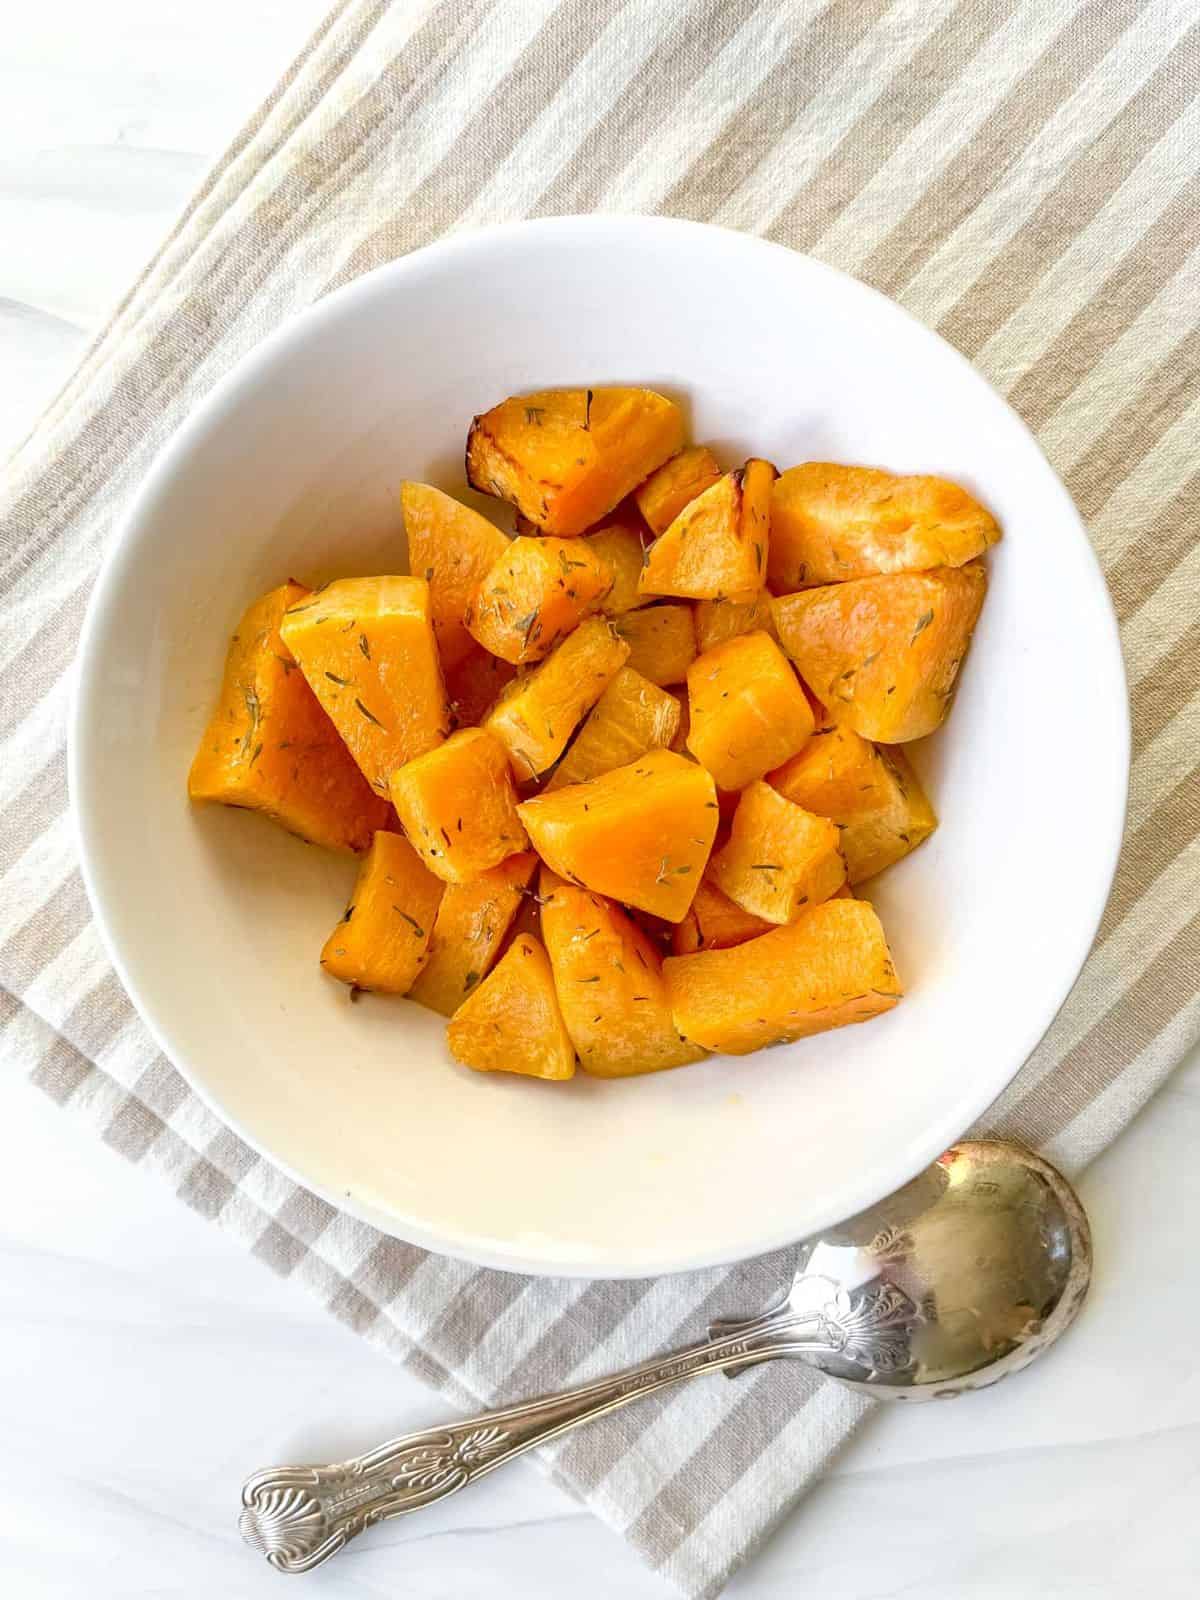 butternut squash cubes in a white bowl on a beige and white striped cloth next to a spoon.